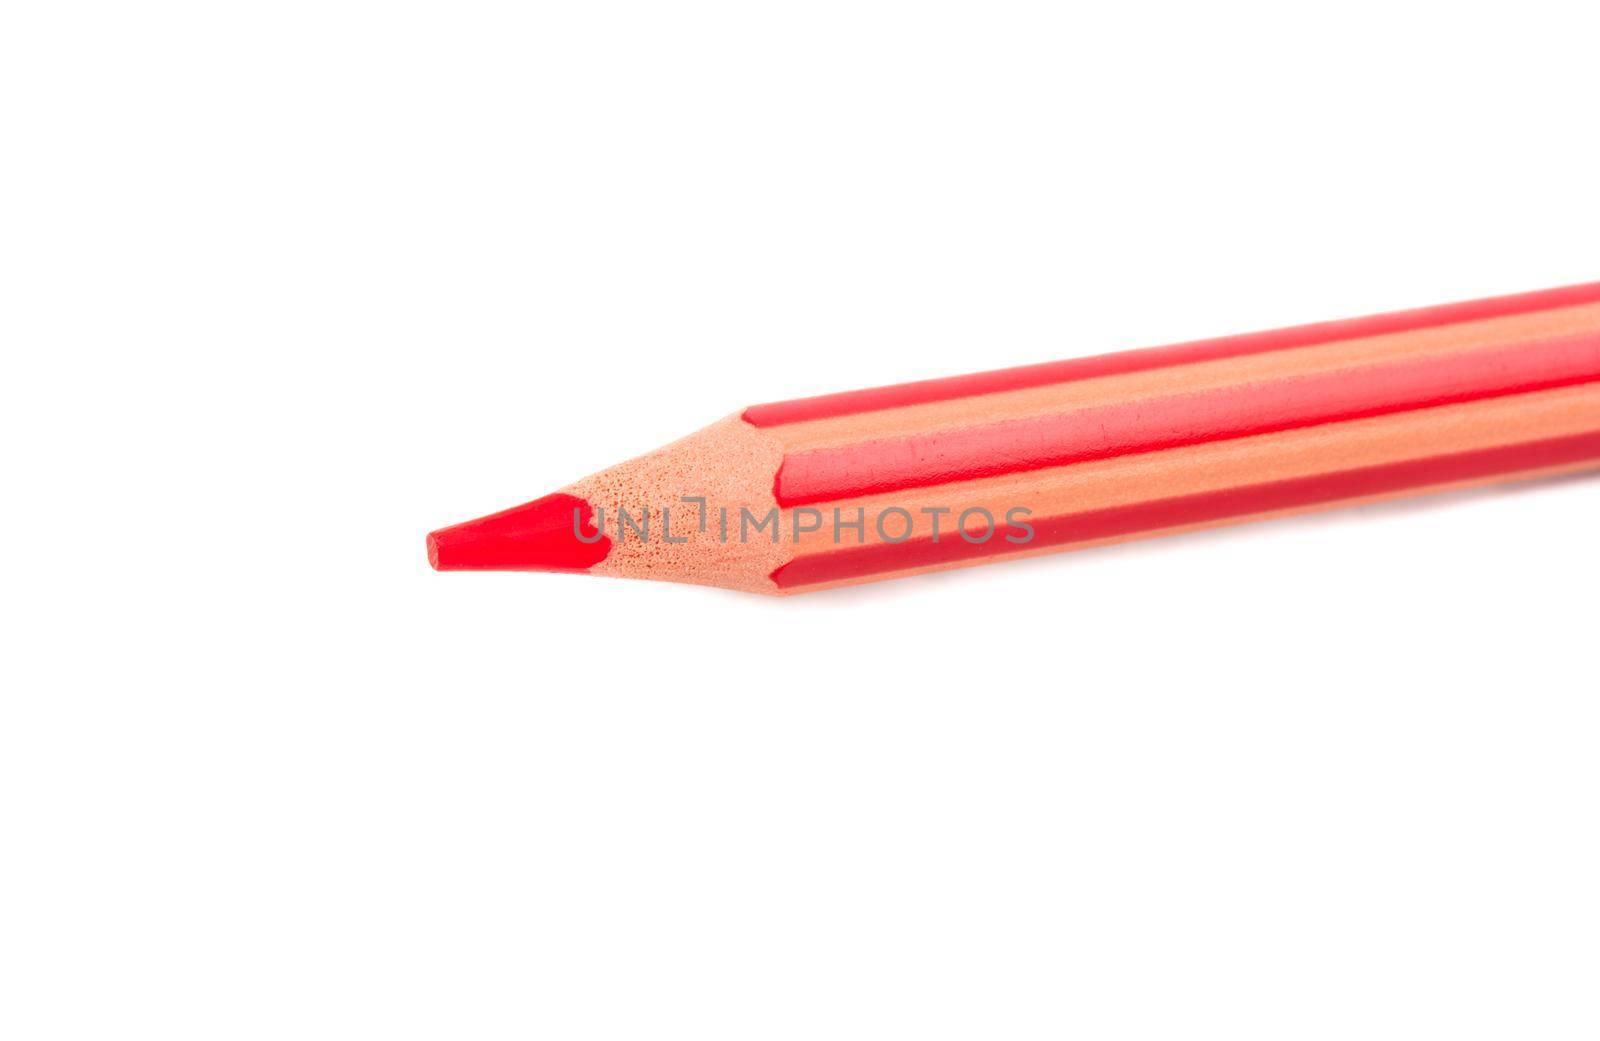 Red pencil close up on white background